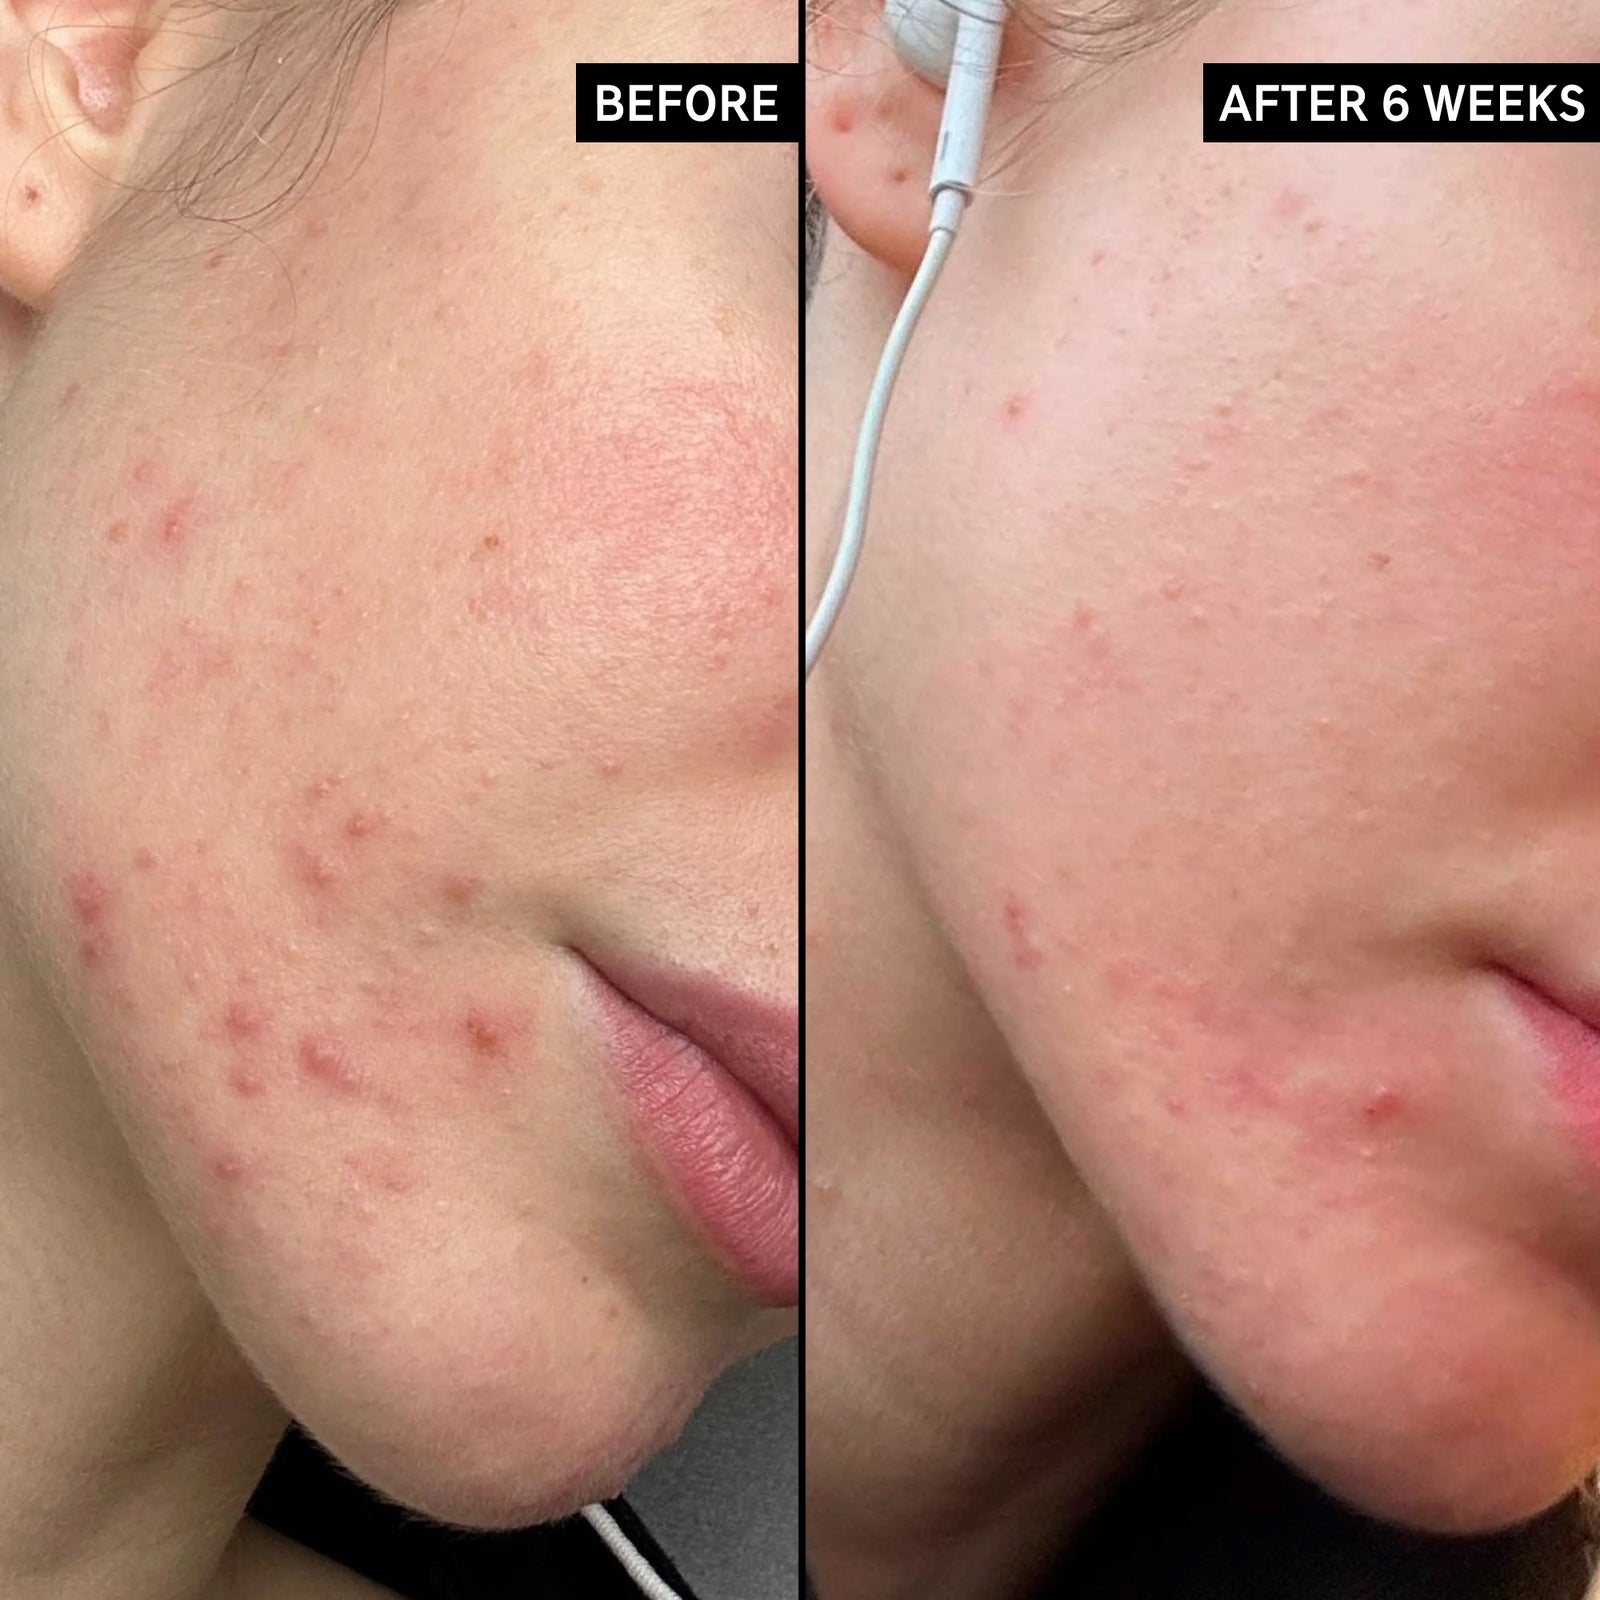 Before and after pictures of someone using Blemish Clearing Moisturizer after 6 weeks